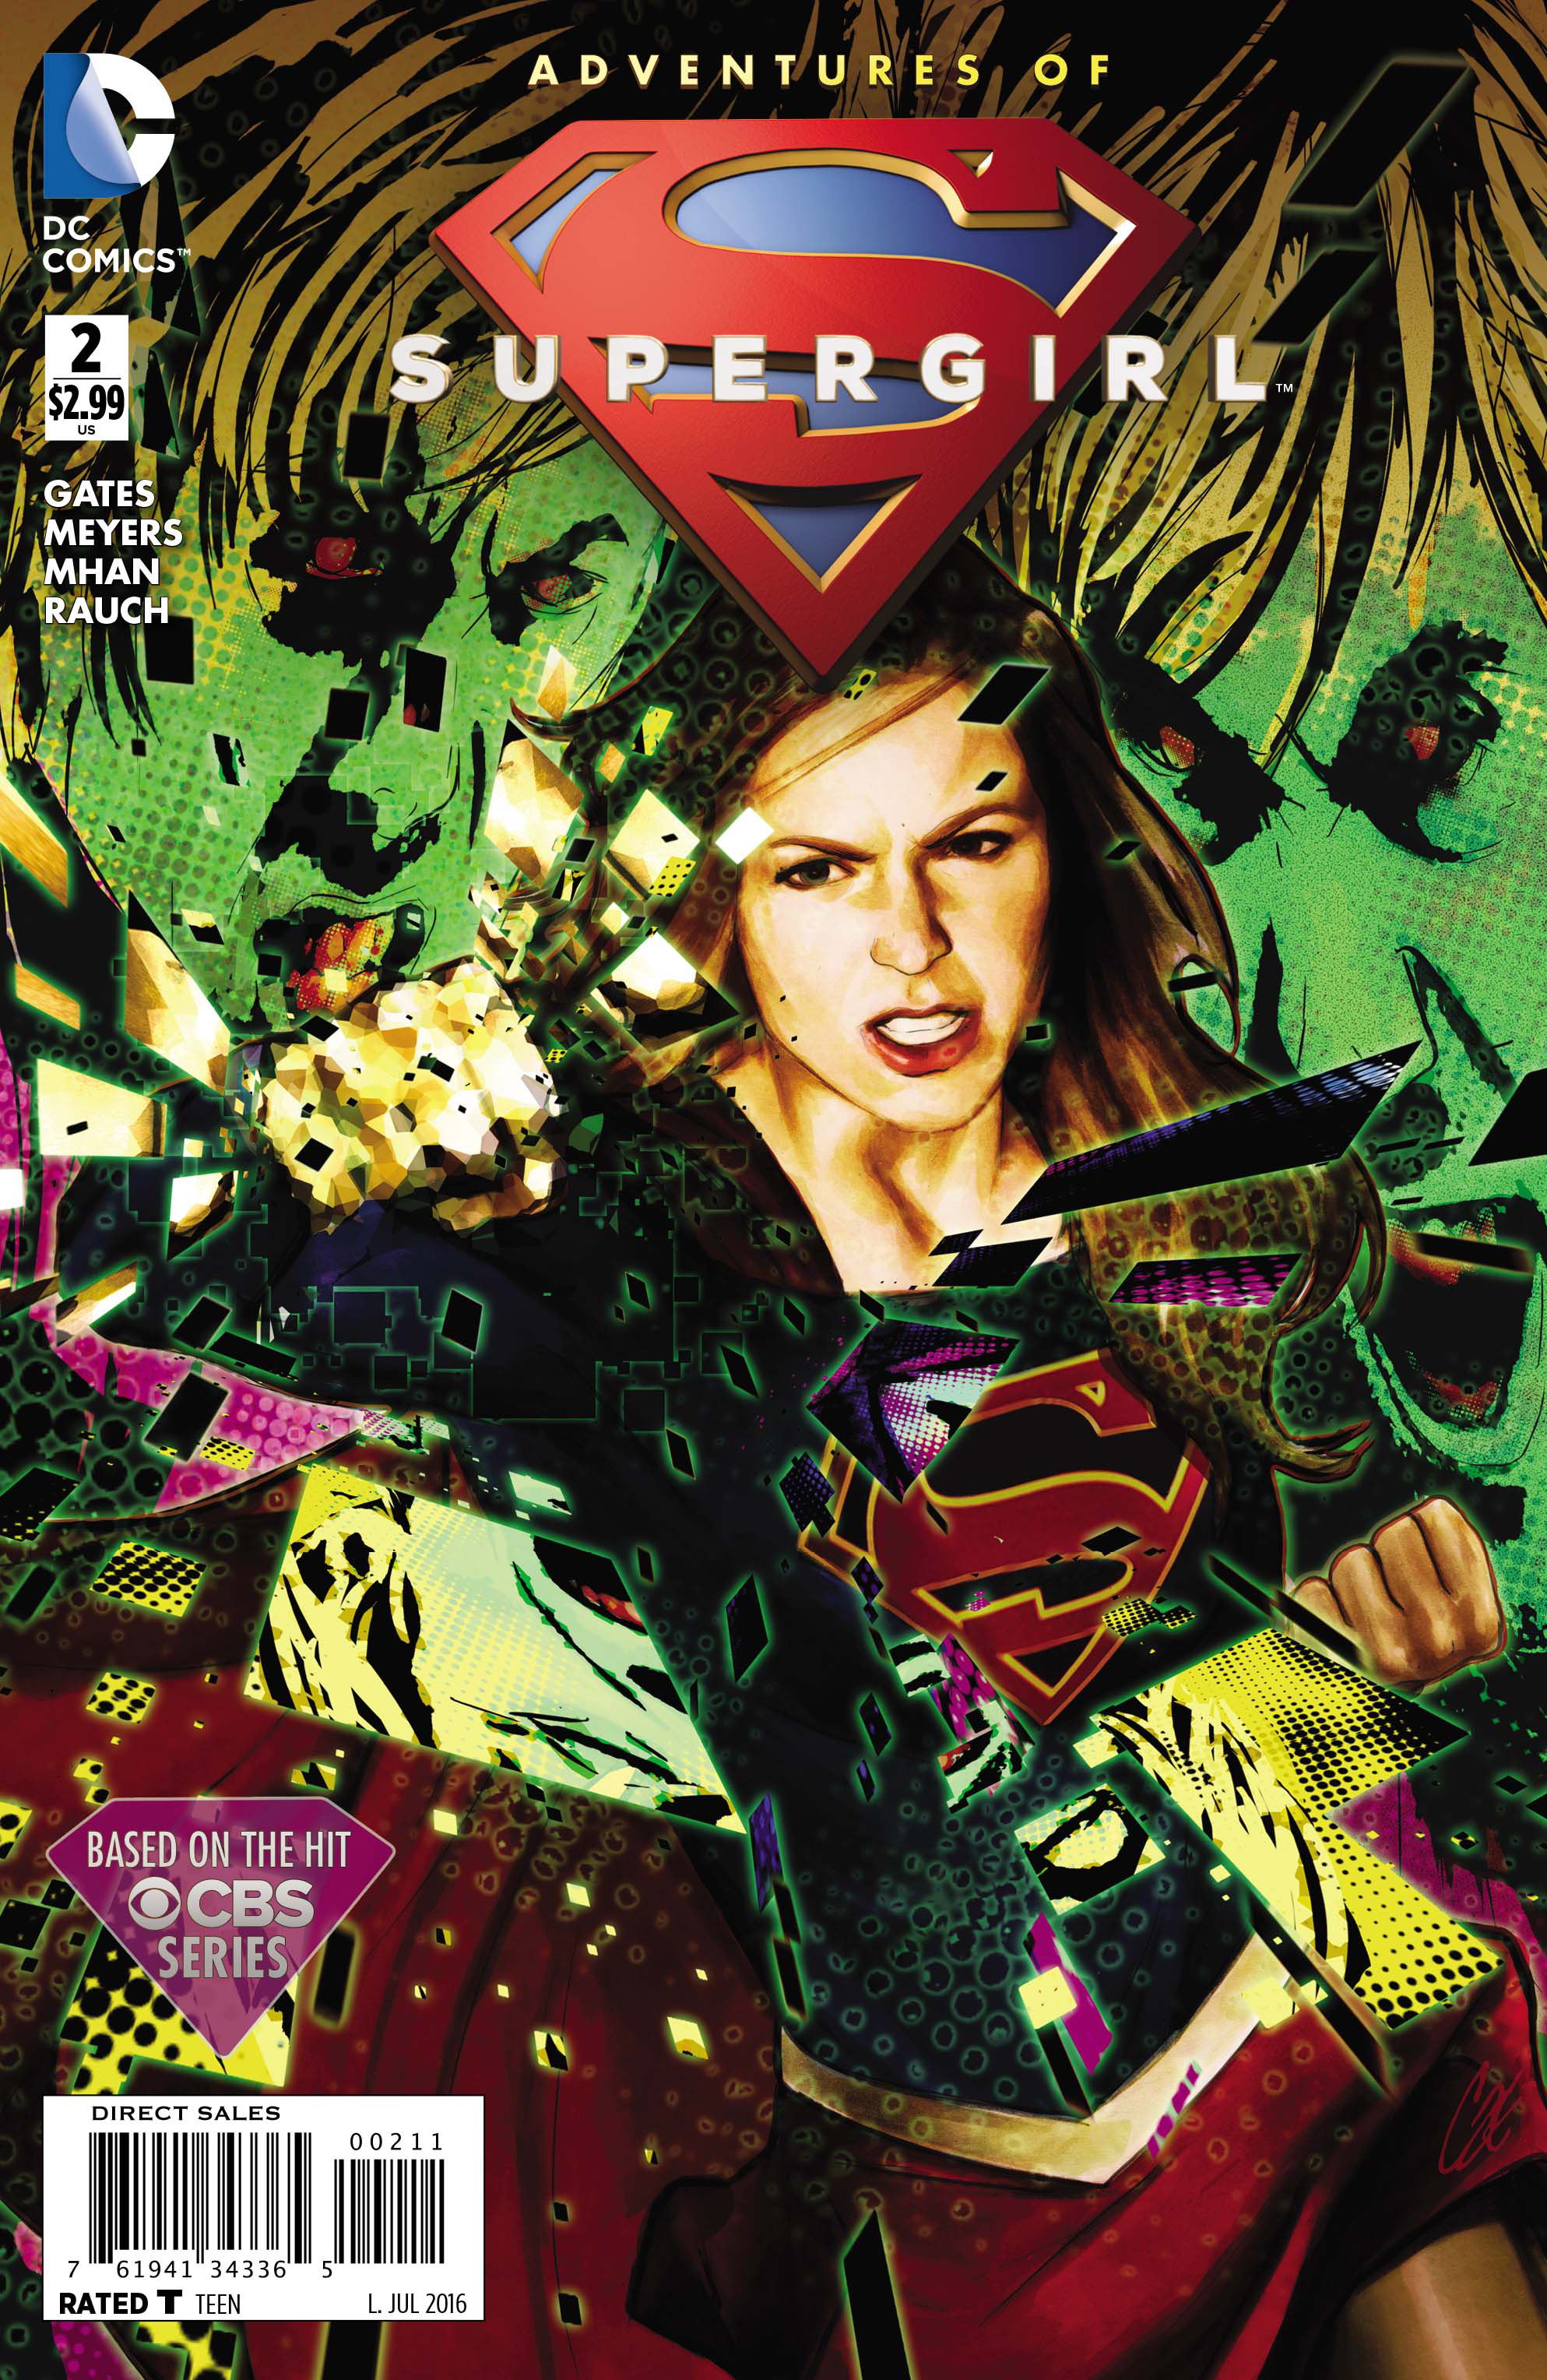 Adventures of Supergirl TP DC Comics Graphic Novel Based on TV Show NEW